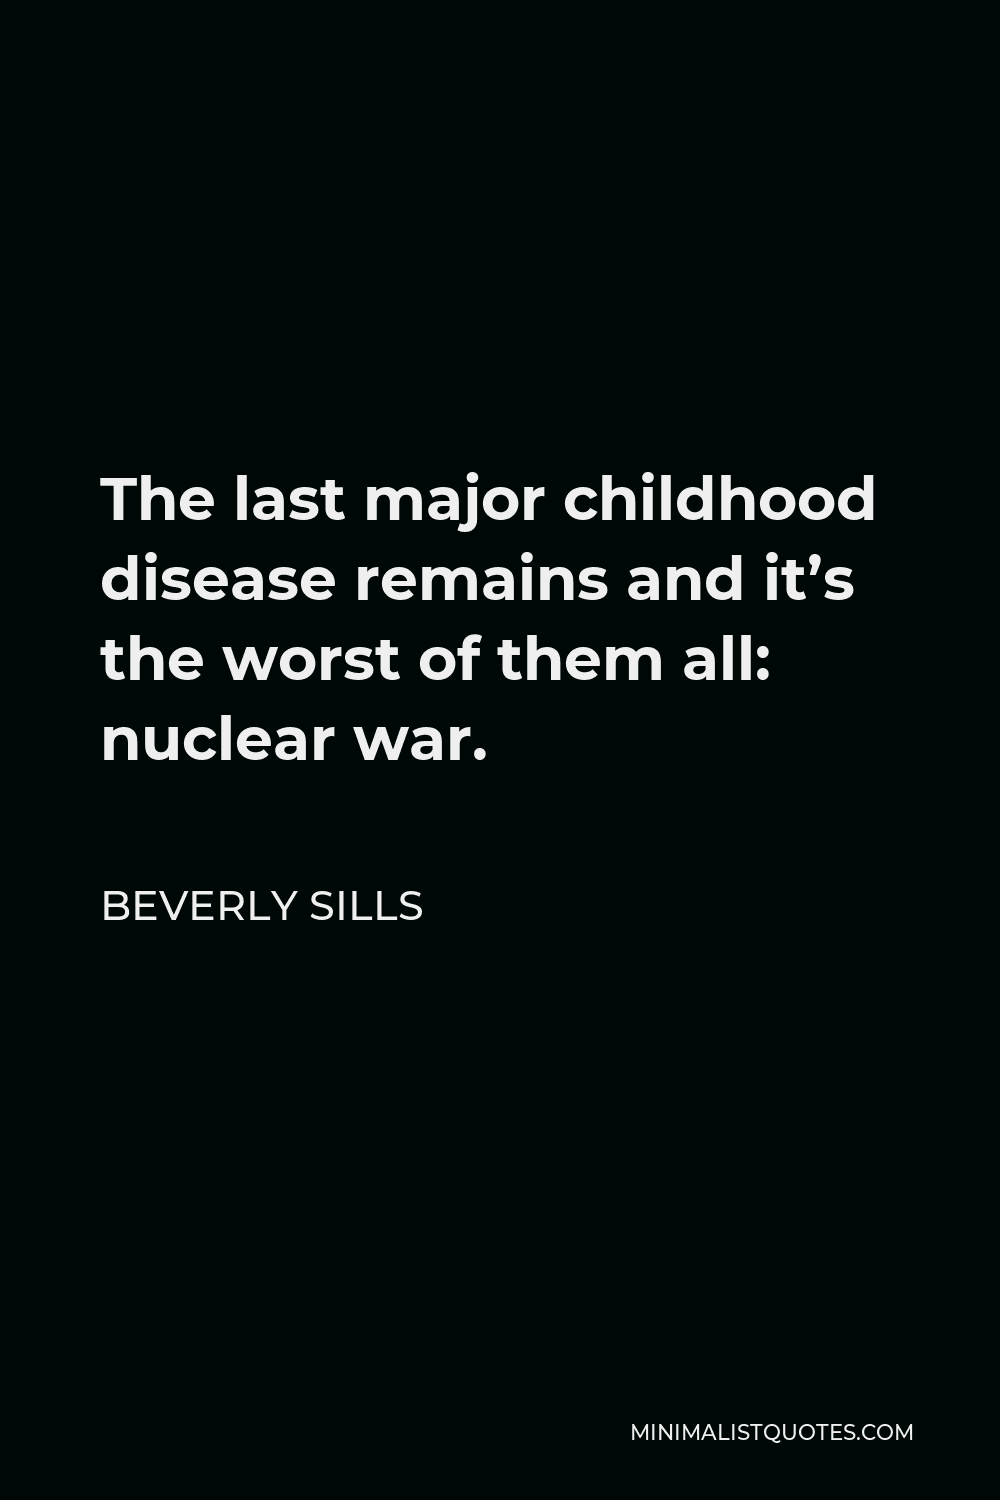 Beverly Sills Quote - The last major childhood disease remains and it’s the worst of them all: nuclear war.